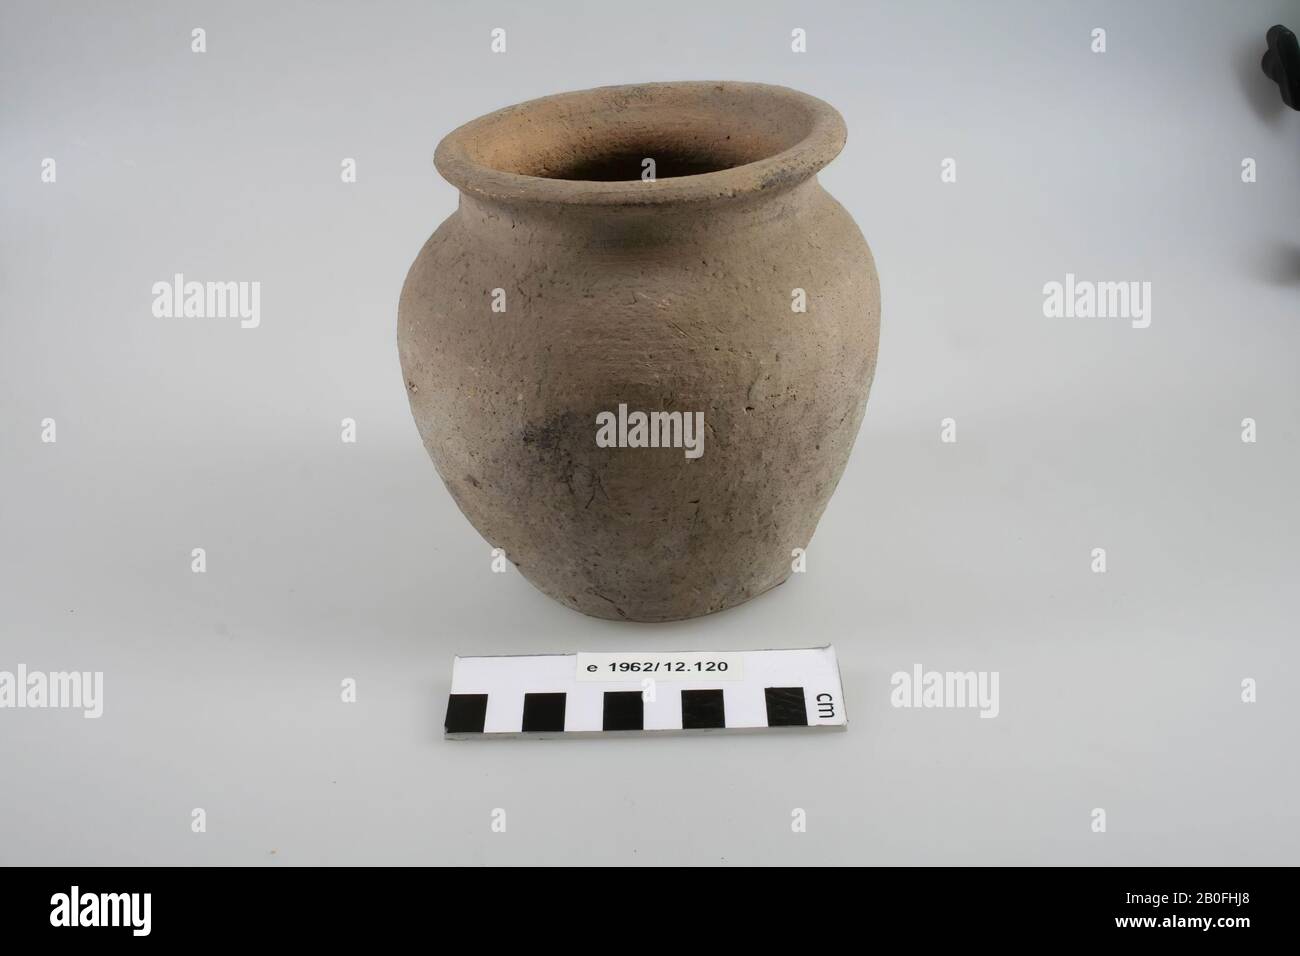 Rough-walled urn of imported turntable pottery. Contains cremated residues, urn, earthenware (Frankish), h: 13.4 cm, diam: 13 cm, vmeb, The Netherlands, Gelderland, Wageningen, Wageningen Stock Photo